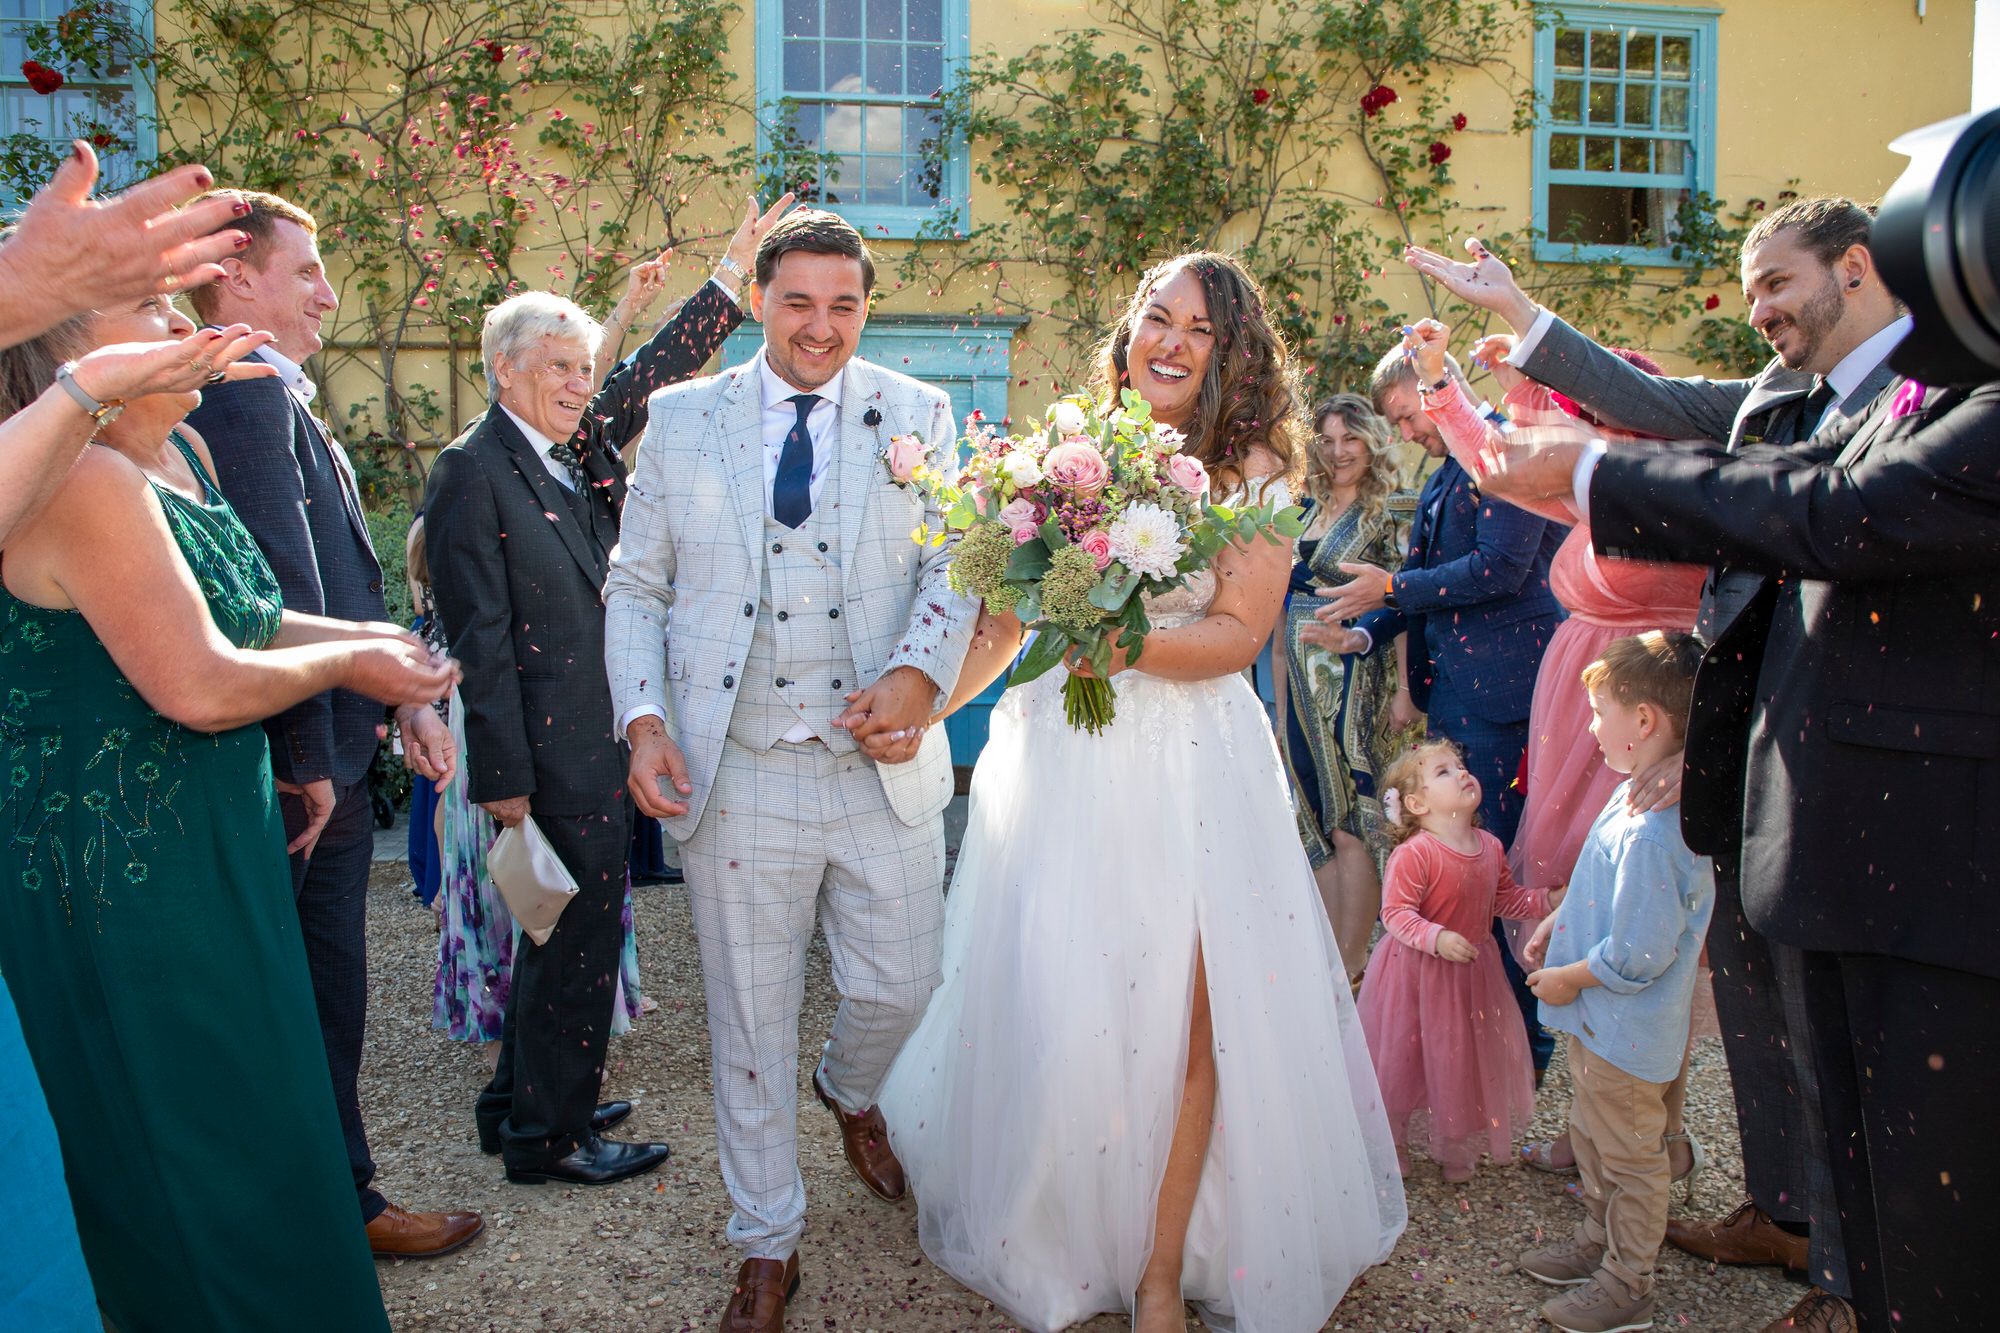 Epic confetti photo in front of South Farm's iconic blue and yellow farmhouse. Joanna and Rafal smiling as they walk through the confetti line. Joanna is holding her beautiful pink and green bouquet. Photo thanks to Nigel Charman Photography. 